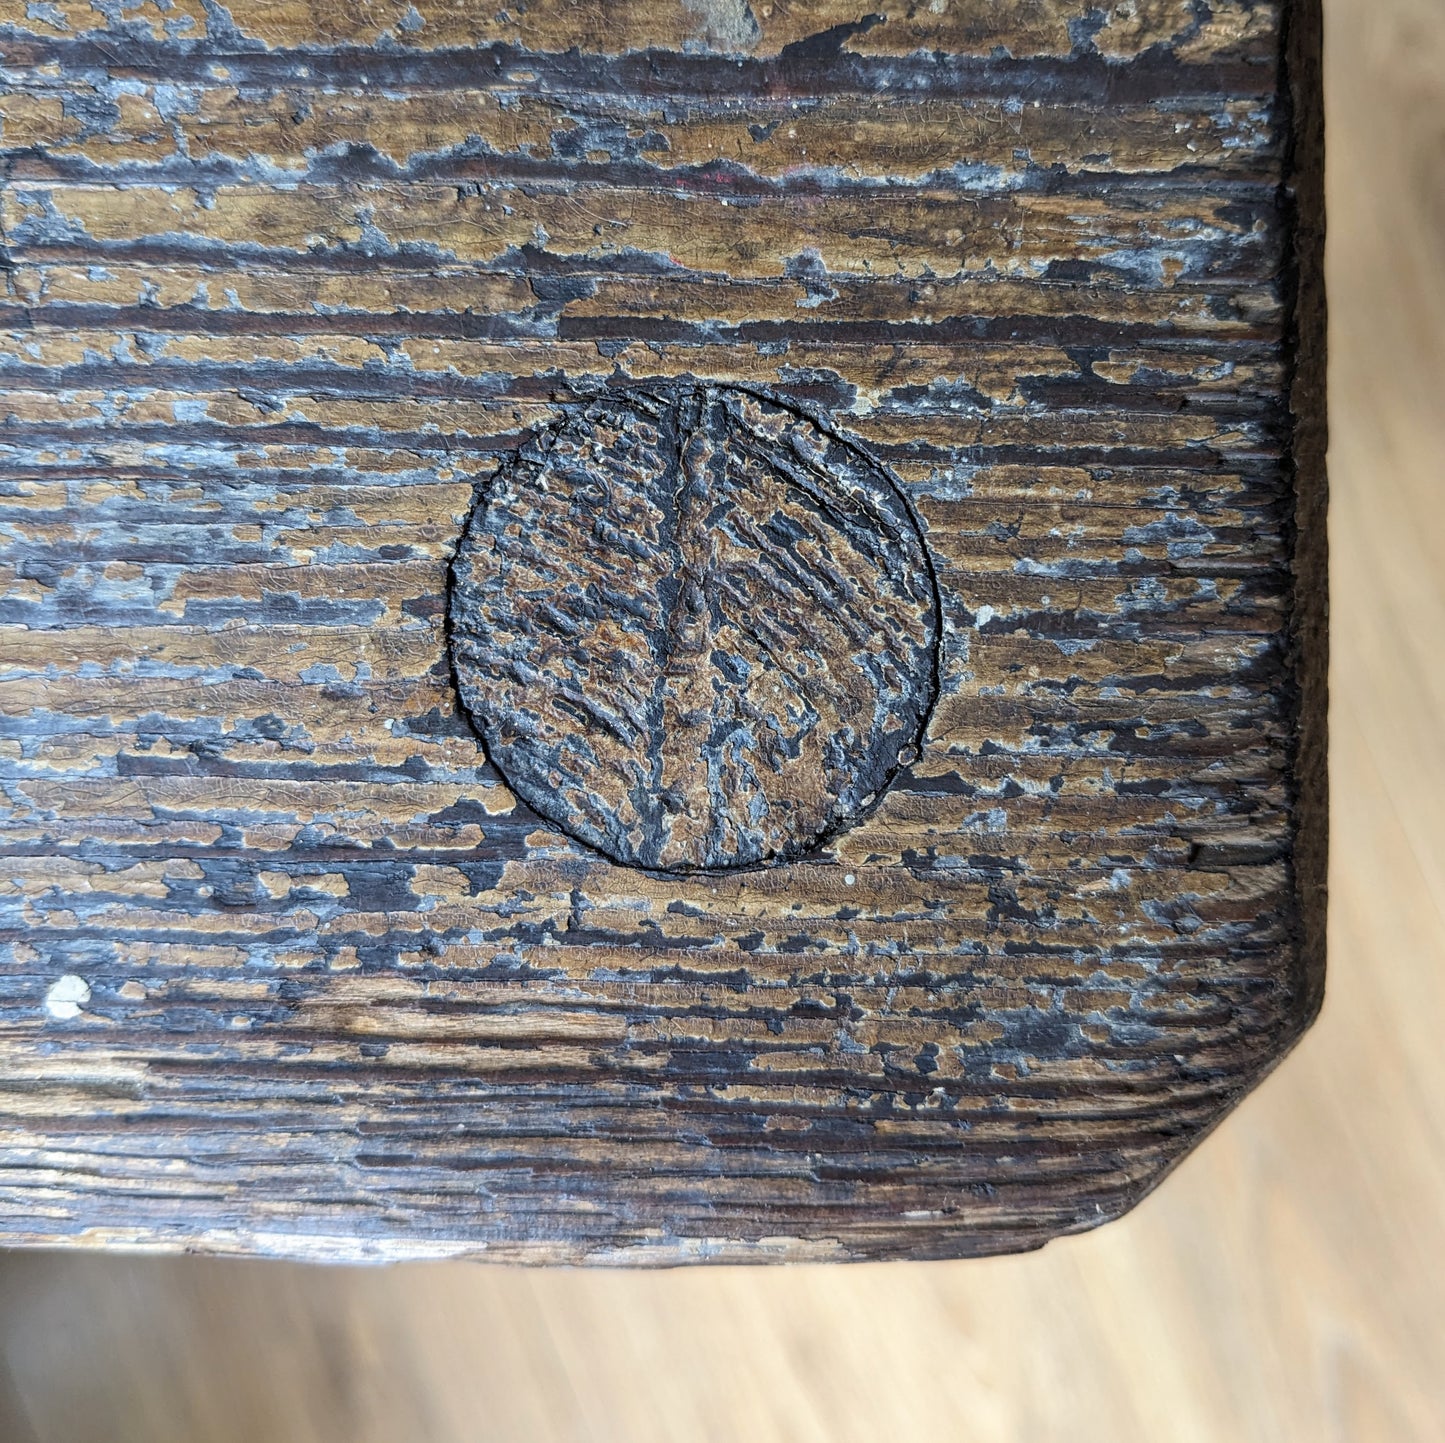 Rustic French Stool